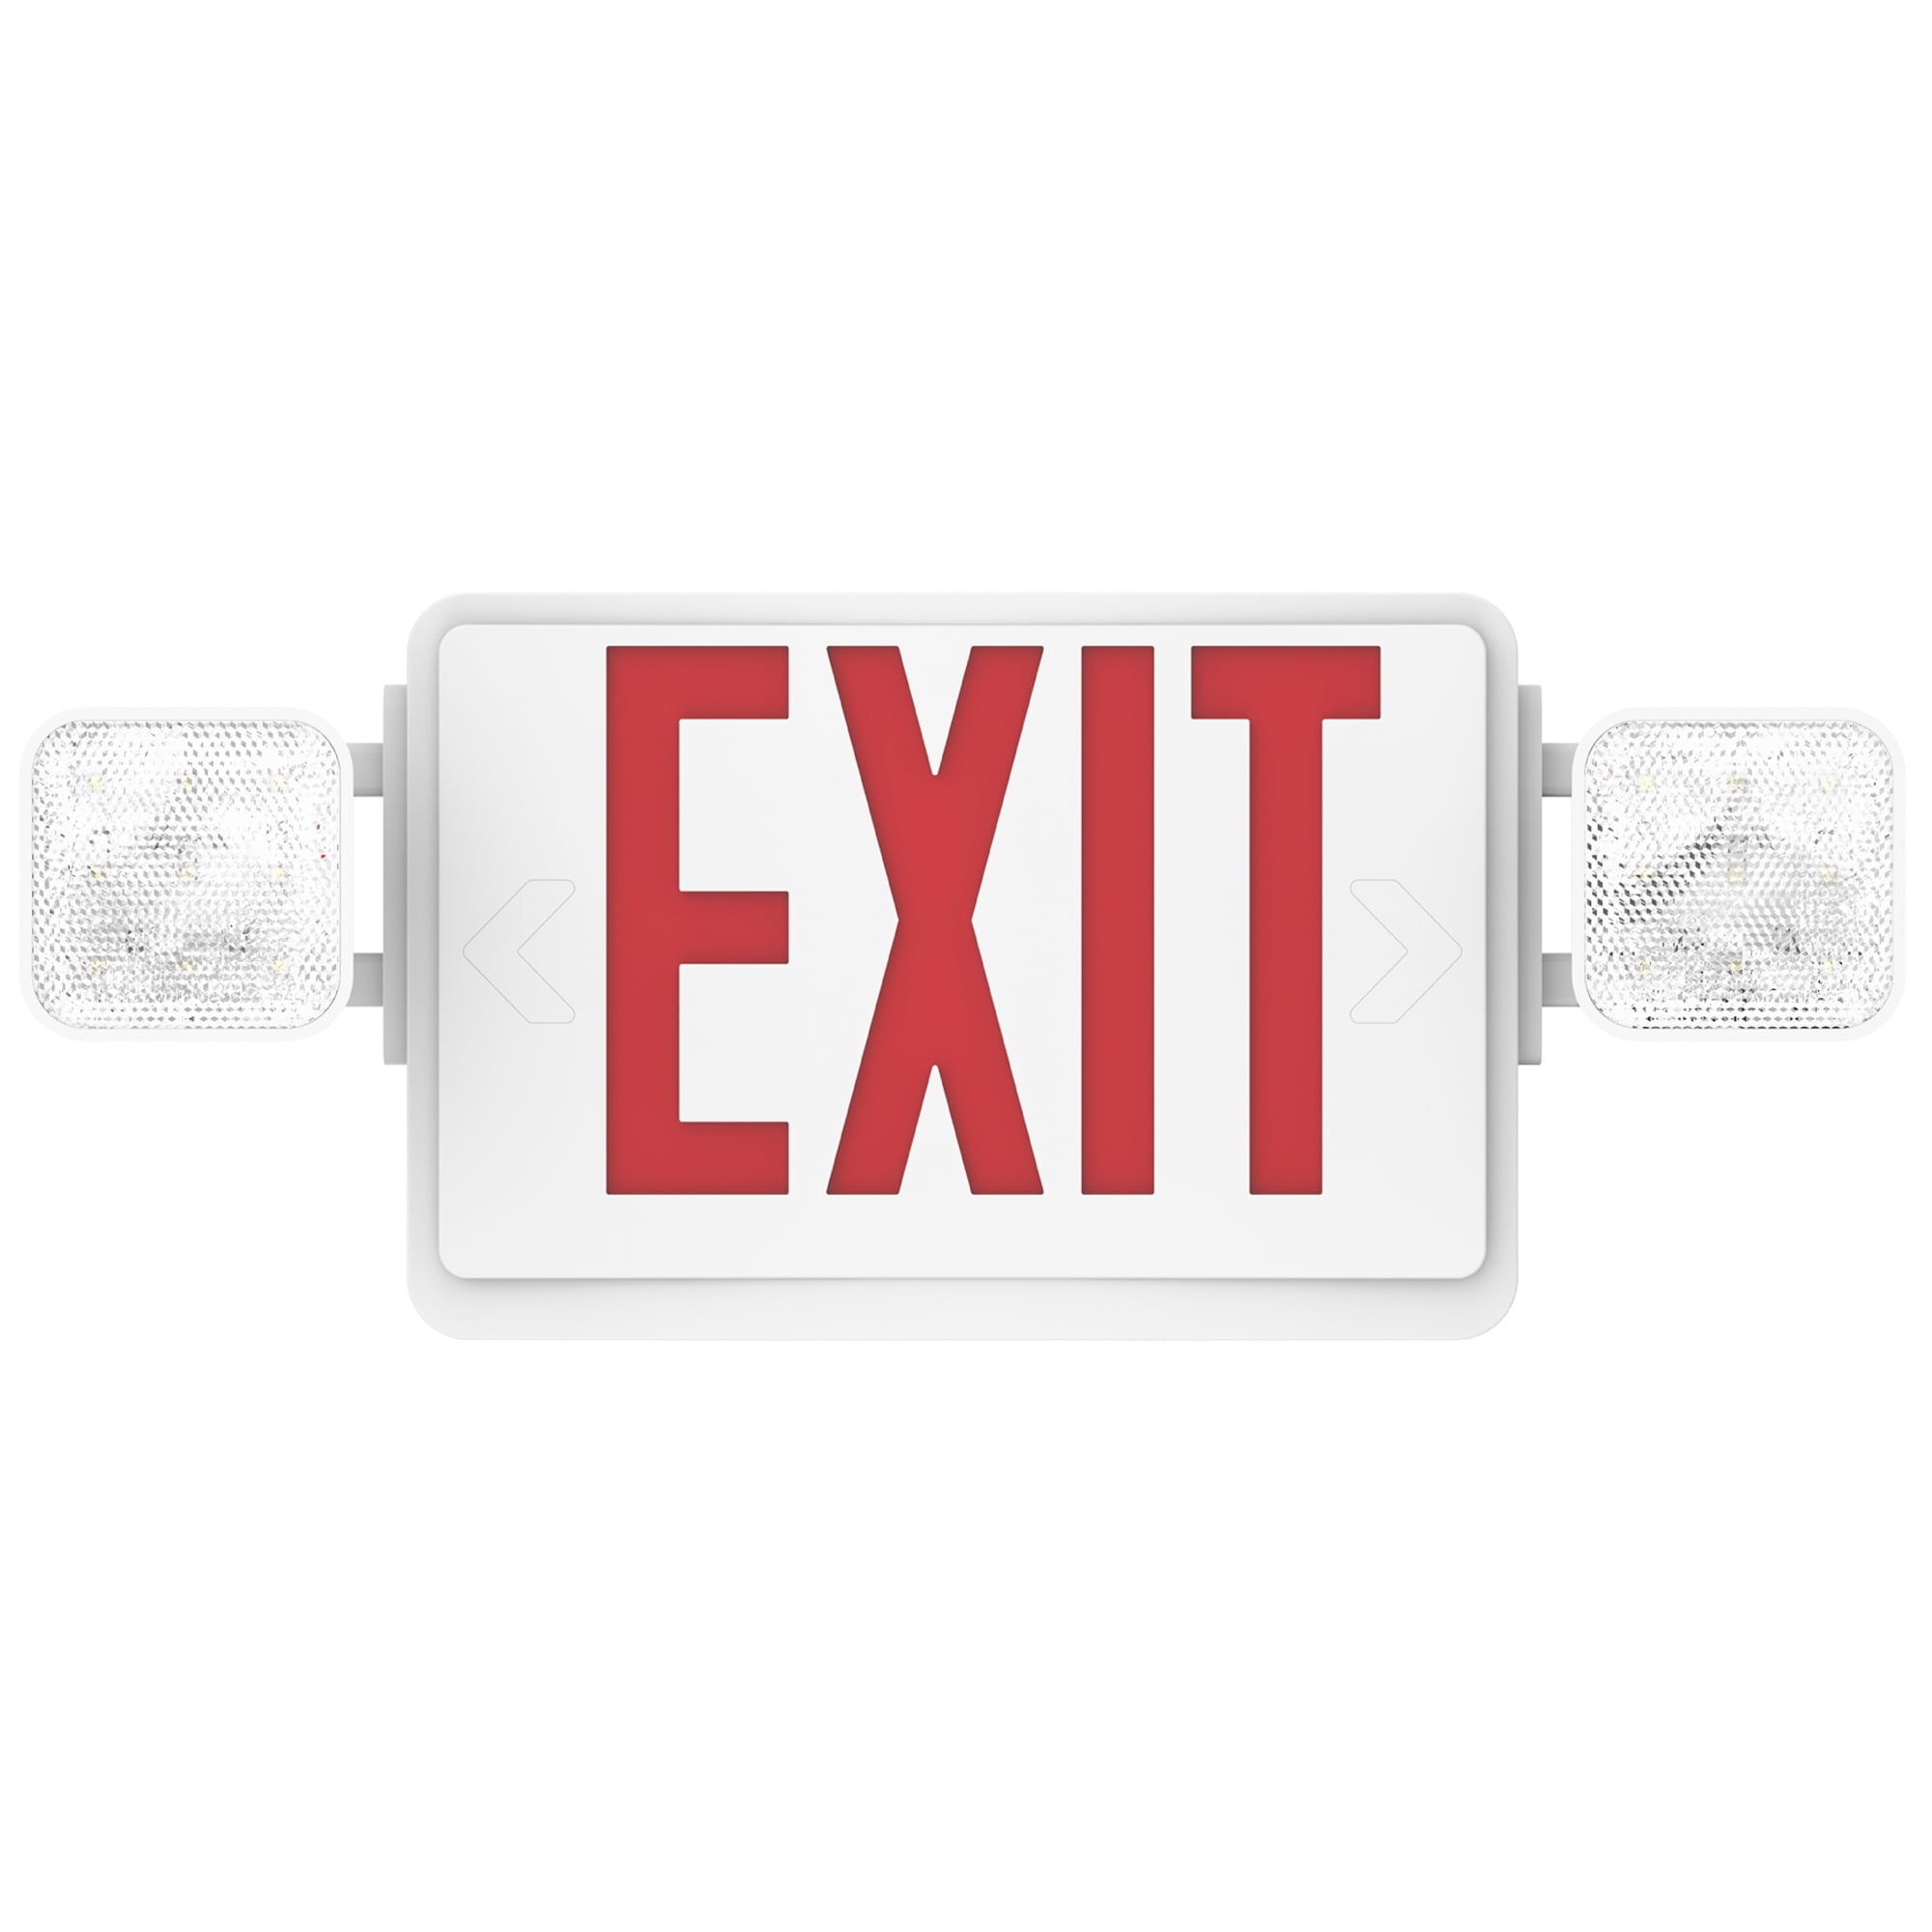 All-Pro APCH7R White Housing Hi-Power Red-Letter LED Exit & Emergency Combo Sign 